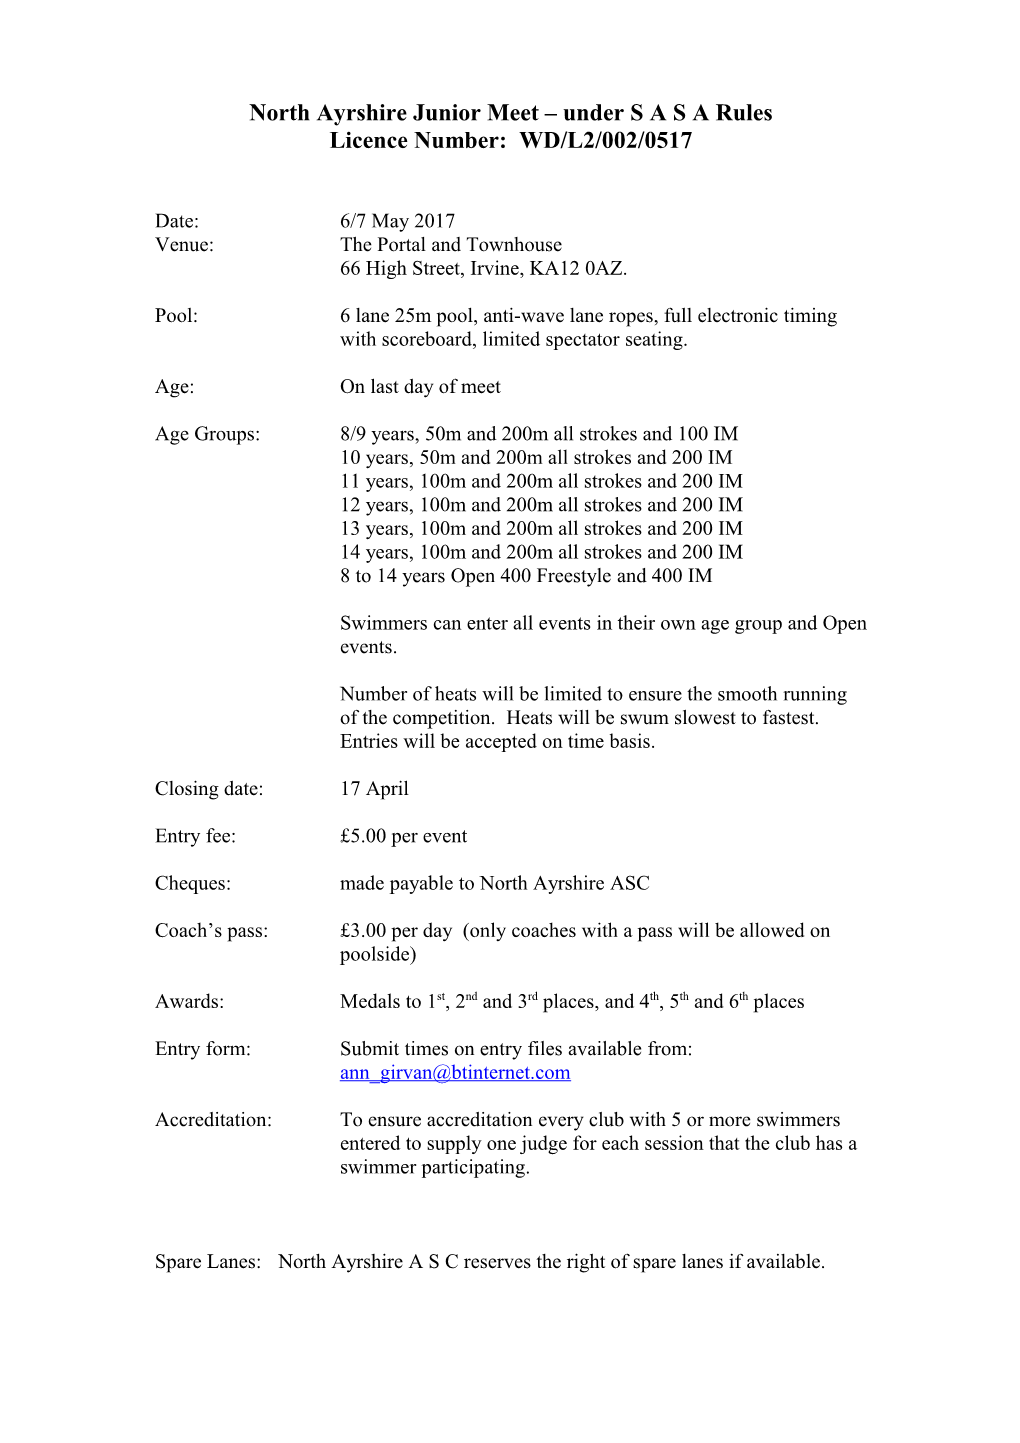 North Ayrshire Junior Meet Under S a S a Rules